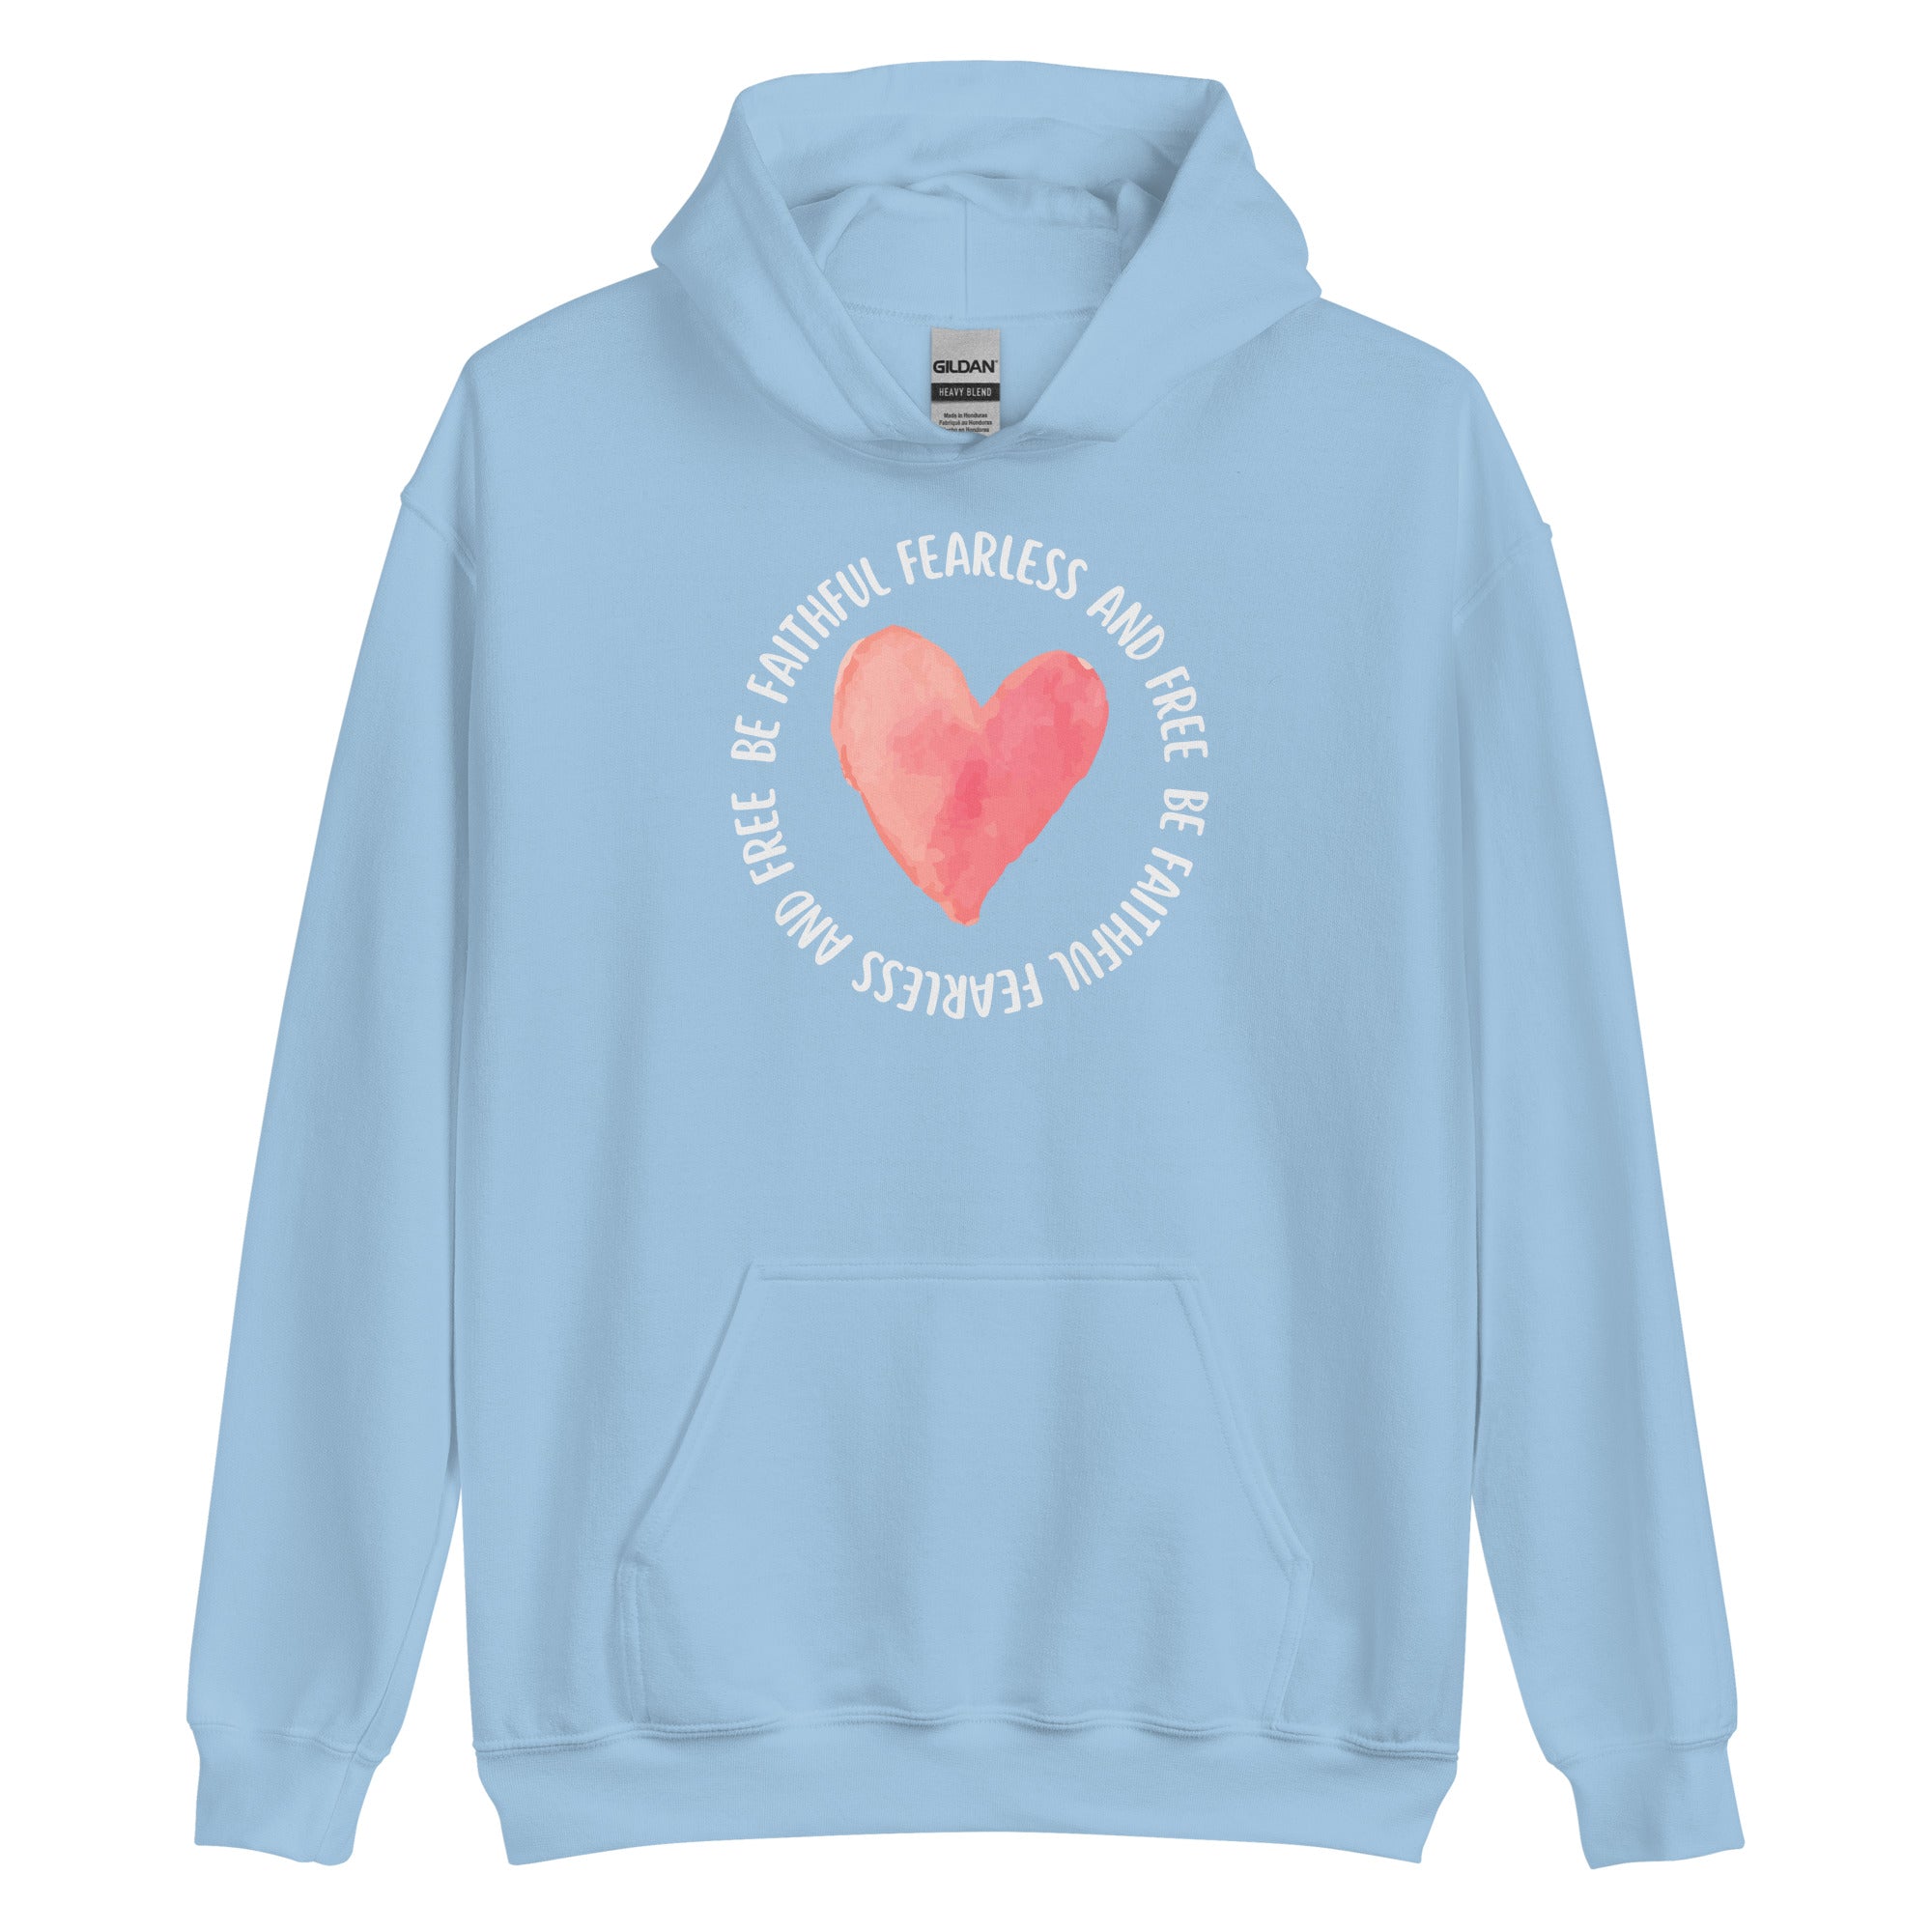 Be Faithful Fearless And Free Unisex Hoodie